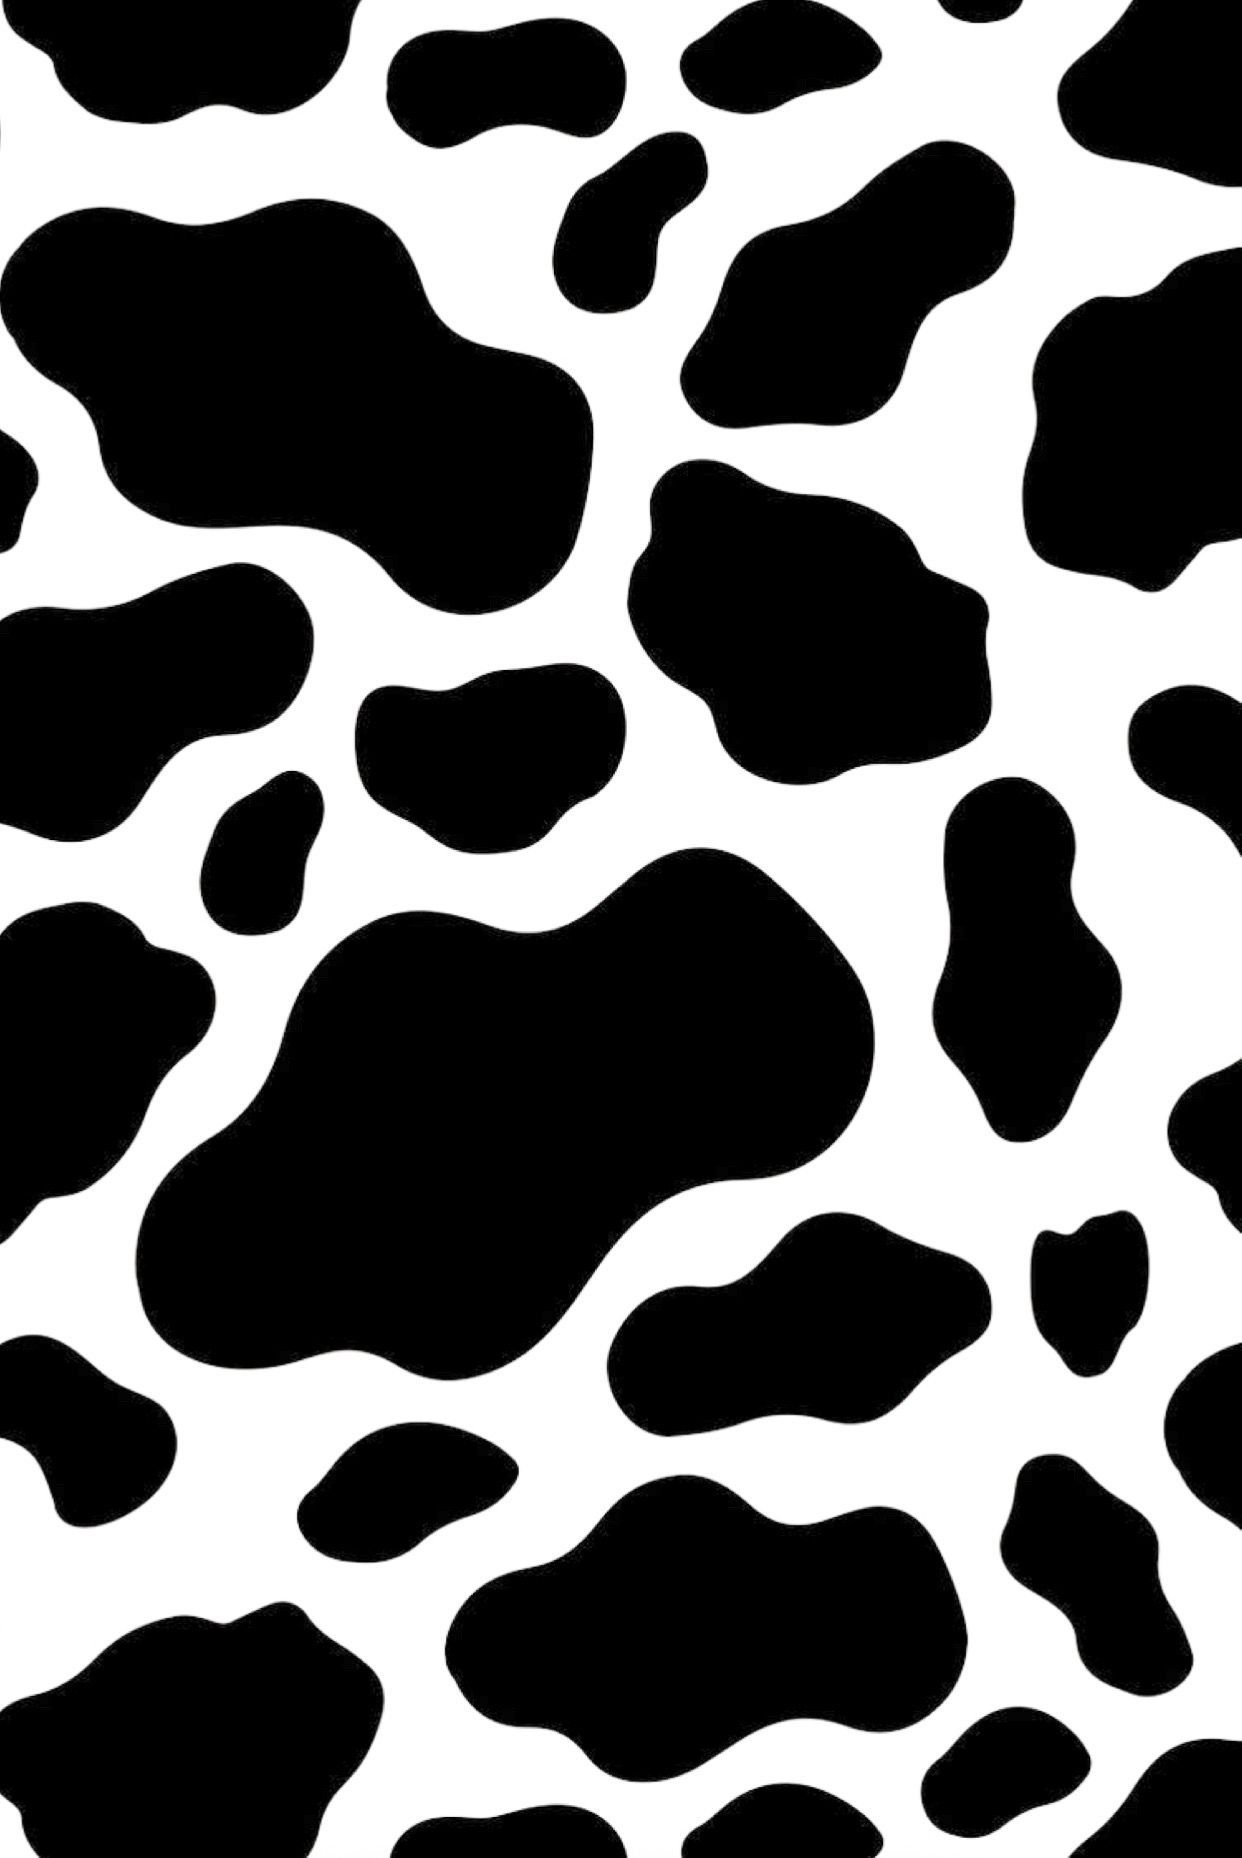 This is a photo of a cow print wallpaper in black and white. - Cow